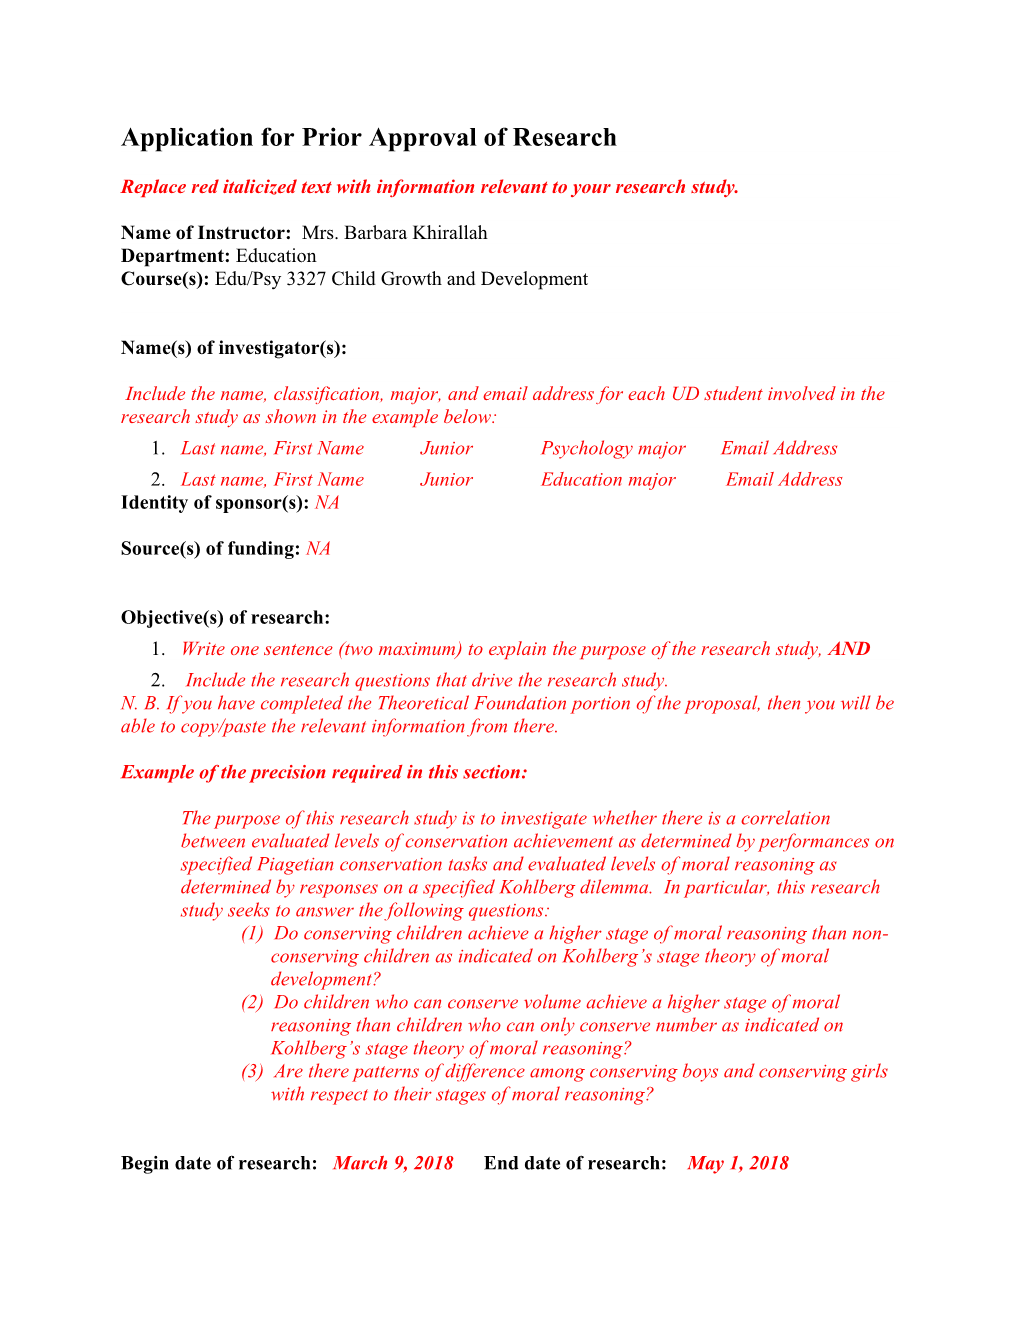 Application for Prior Approval of Research